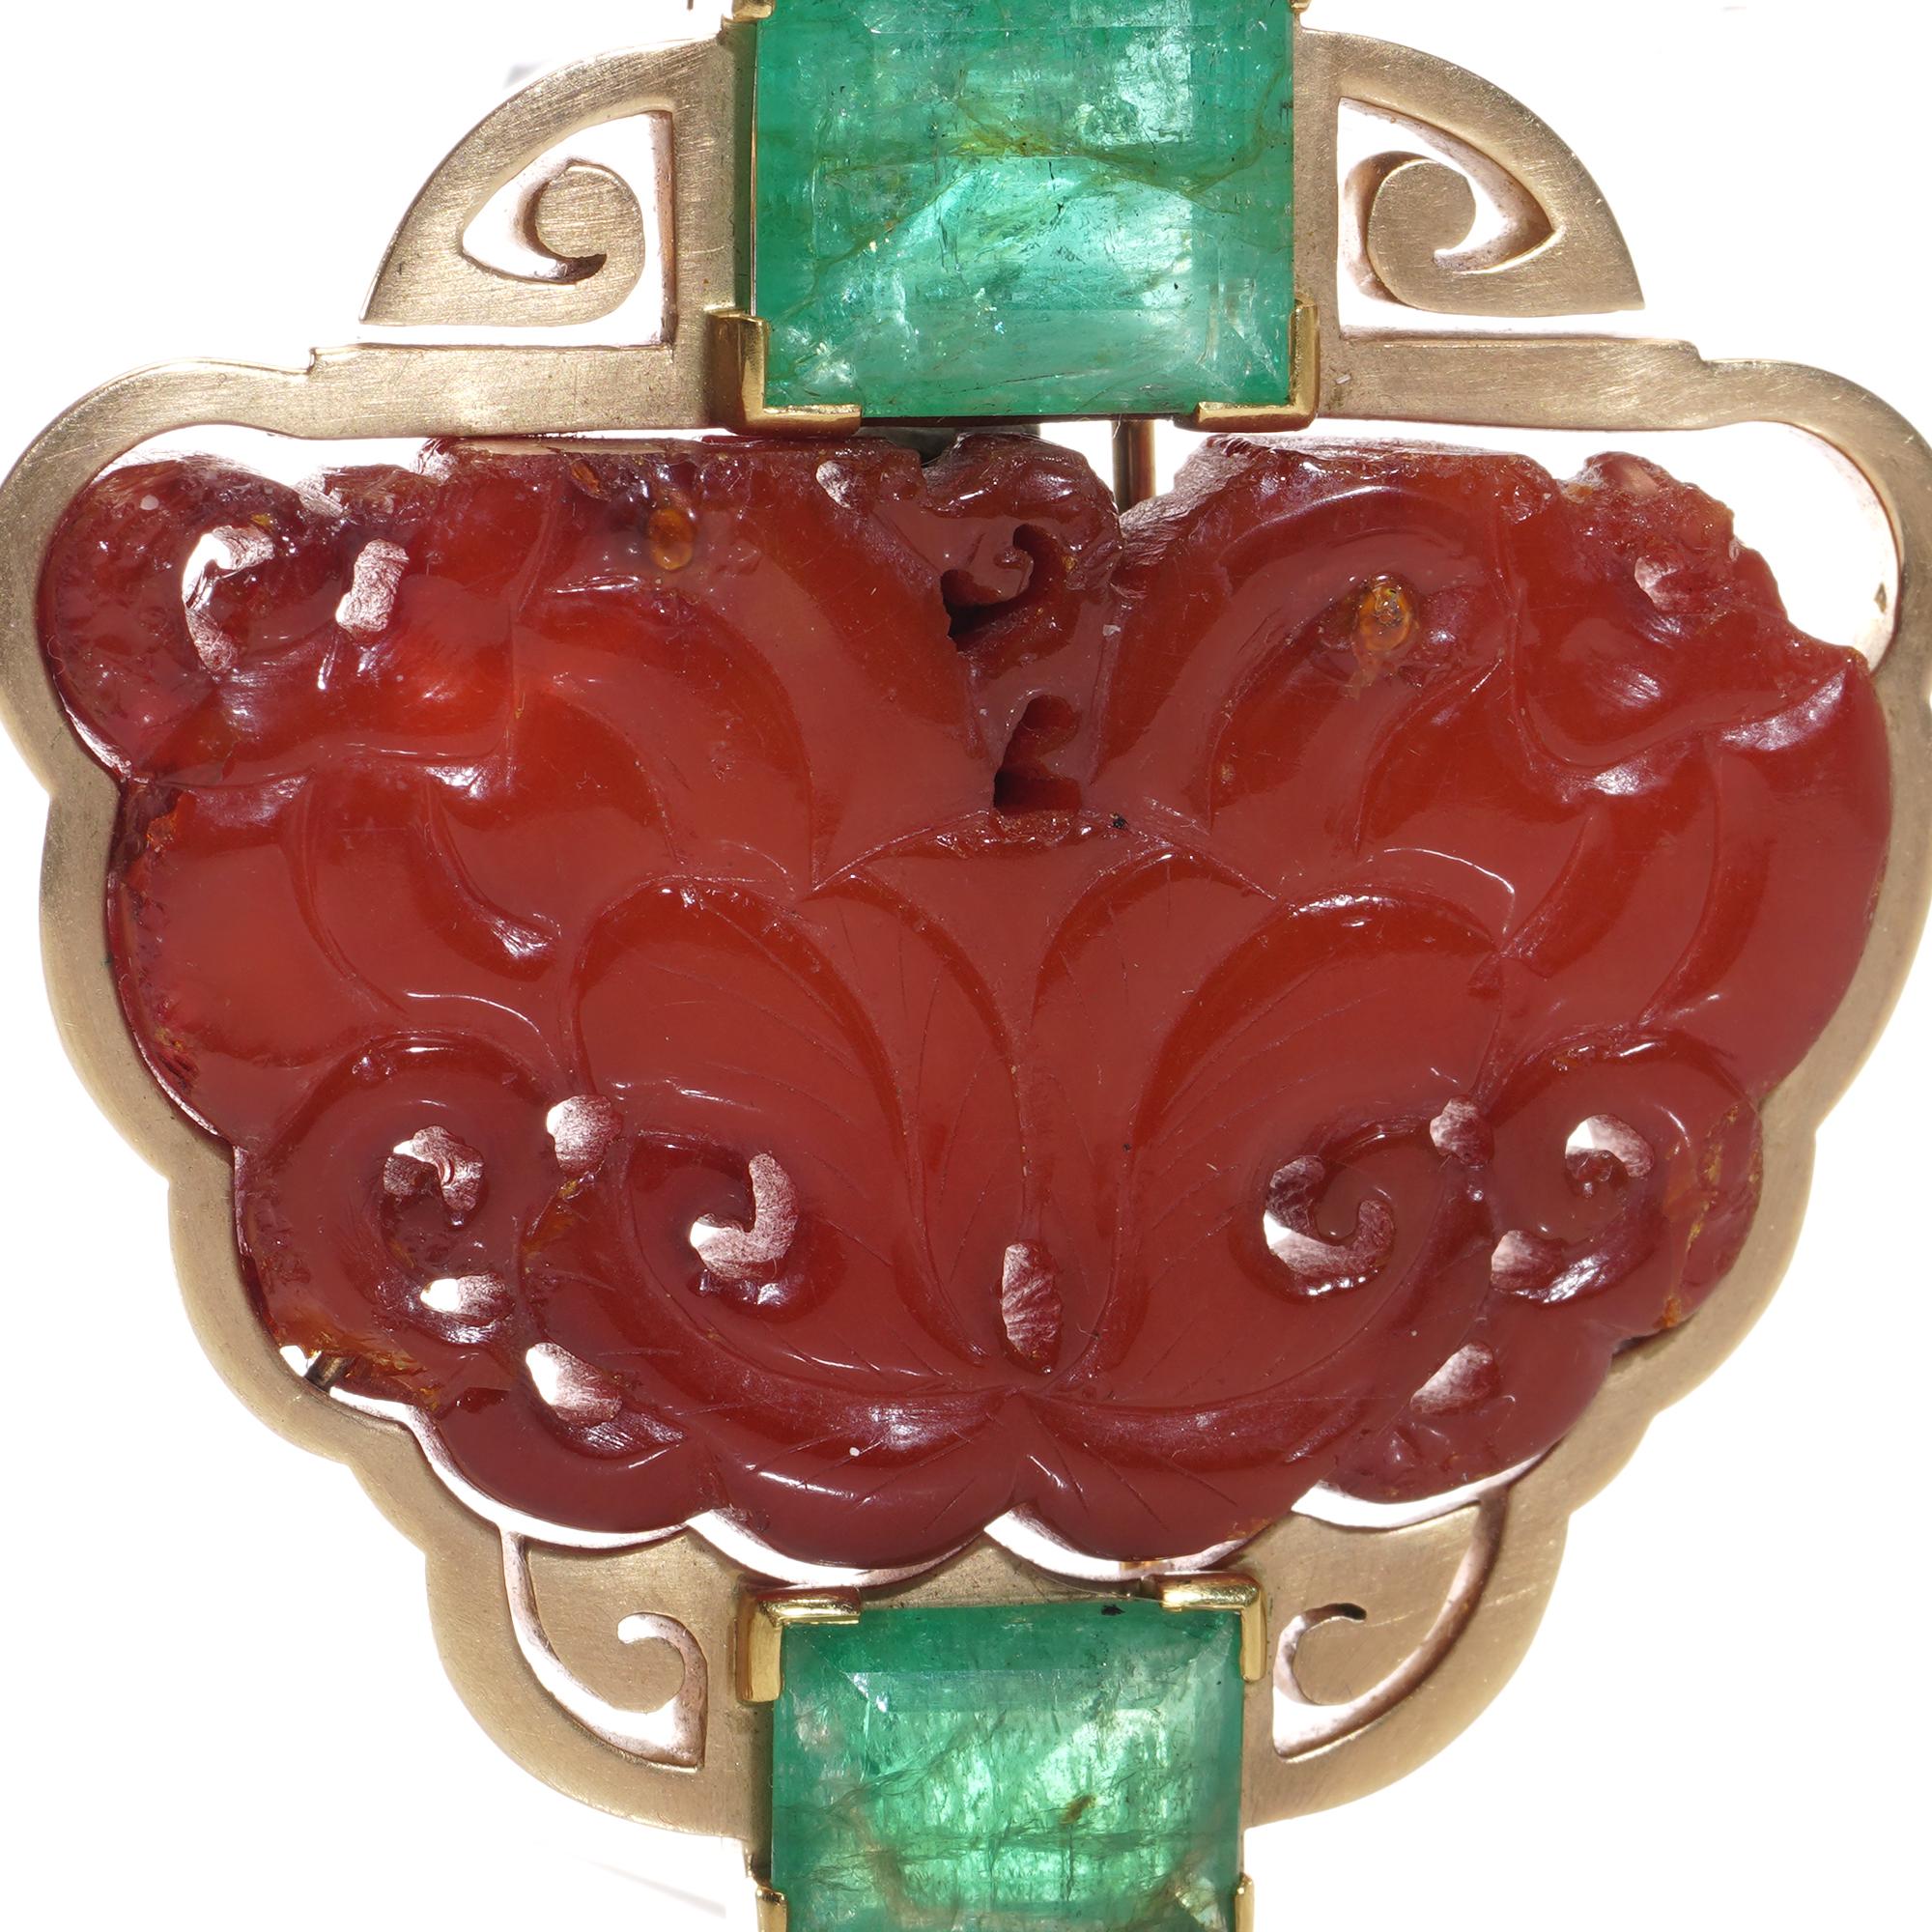 Antique Chinese 14kt. gold and carved amber clip pin brooch set with two Columbian emeralds. 
X-ray tested for 14kt gold. 
Made in Circa, 1920s. 

Dimensions:
The brooch height x width: 5.3 x 5.5 cm  
Total weight: 37.8 grams 

Emeralds  -
Quantity: